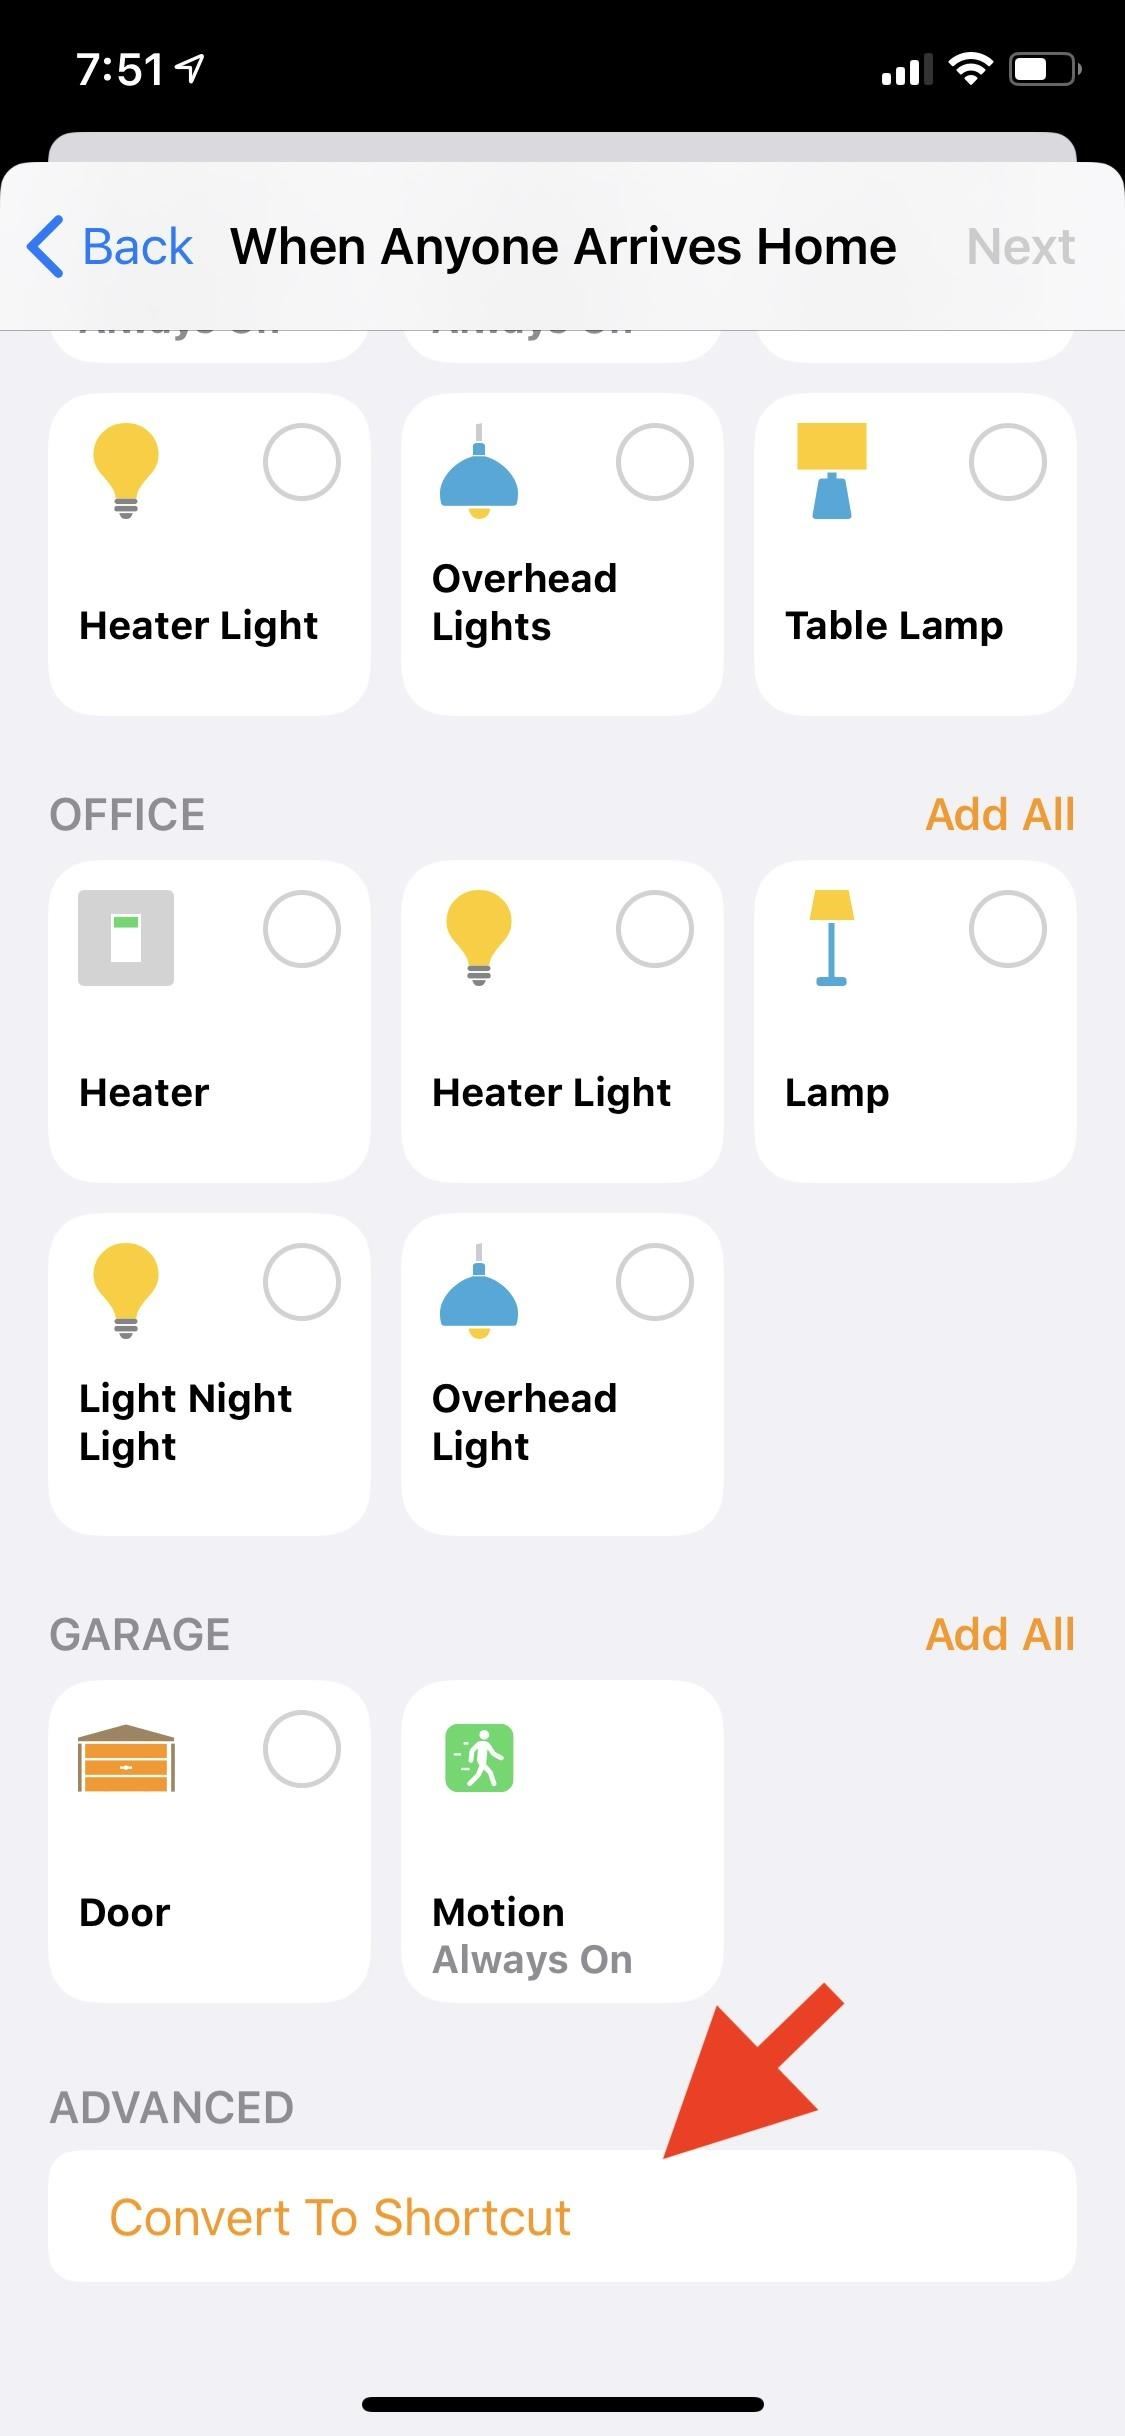 What's New in Shortcuts in iOS 13